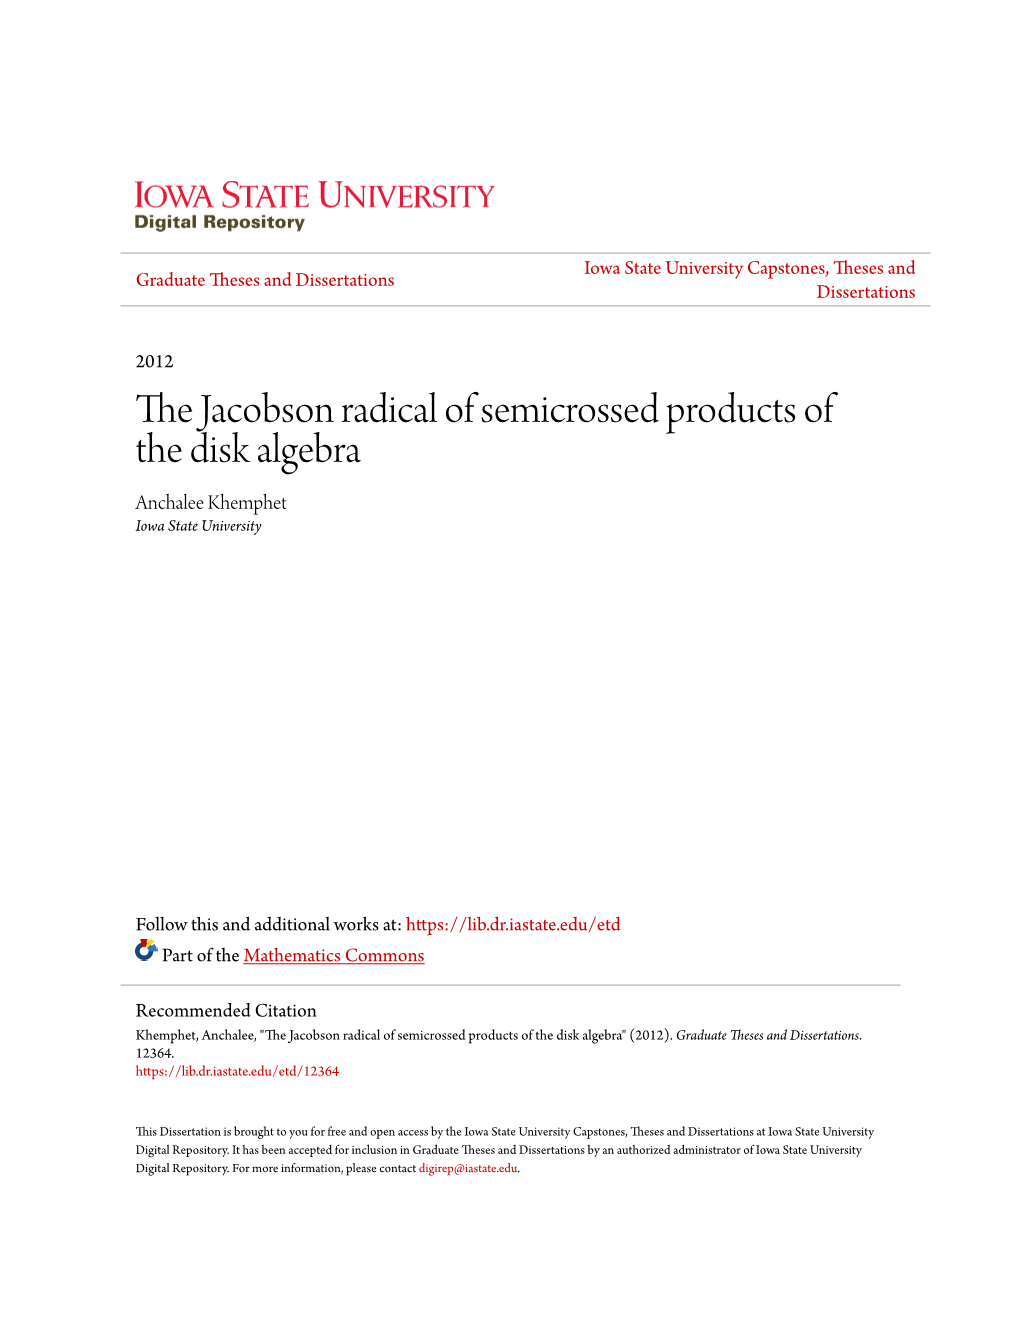 The Jacobson Radical of Semicrossed Products of the Disk Algebra